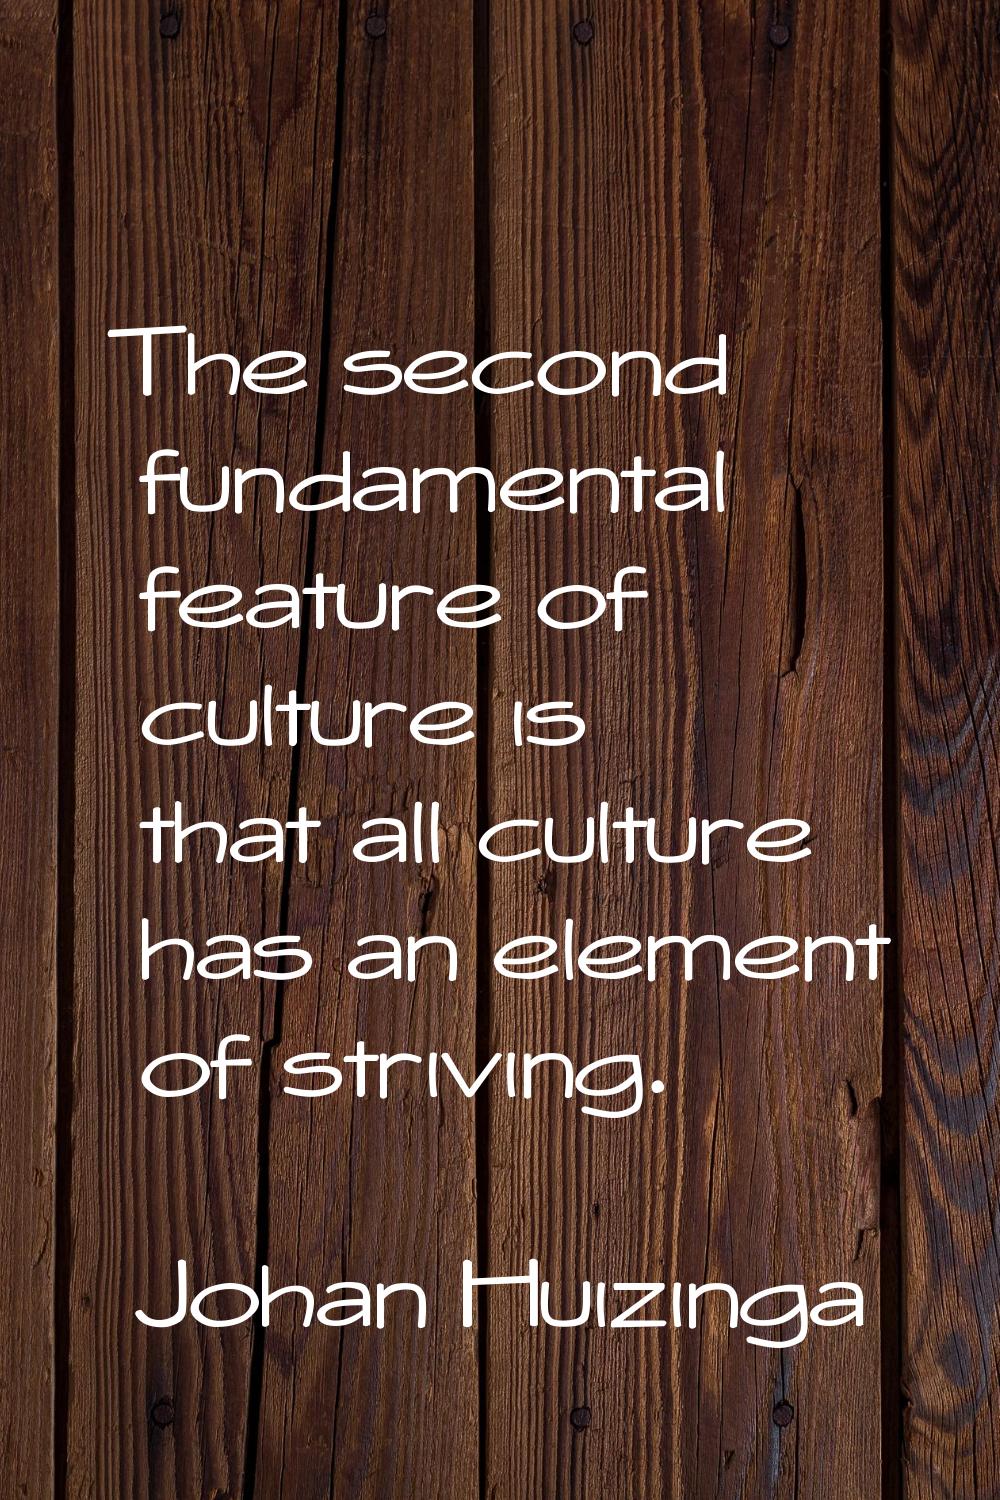 The second fundamental feature of culture is that all culture has an element of striving.